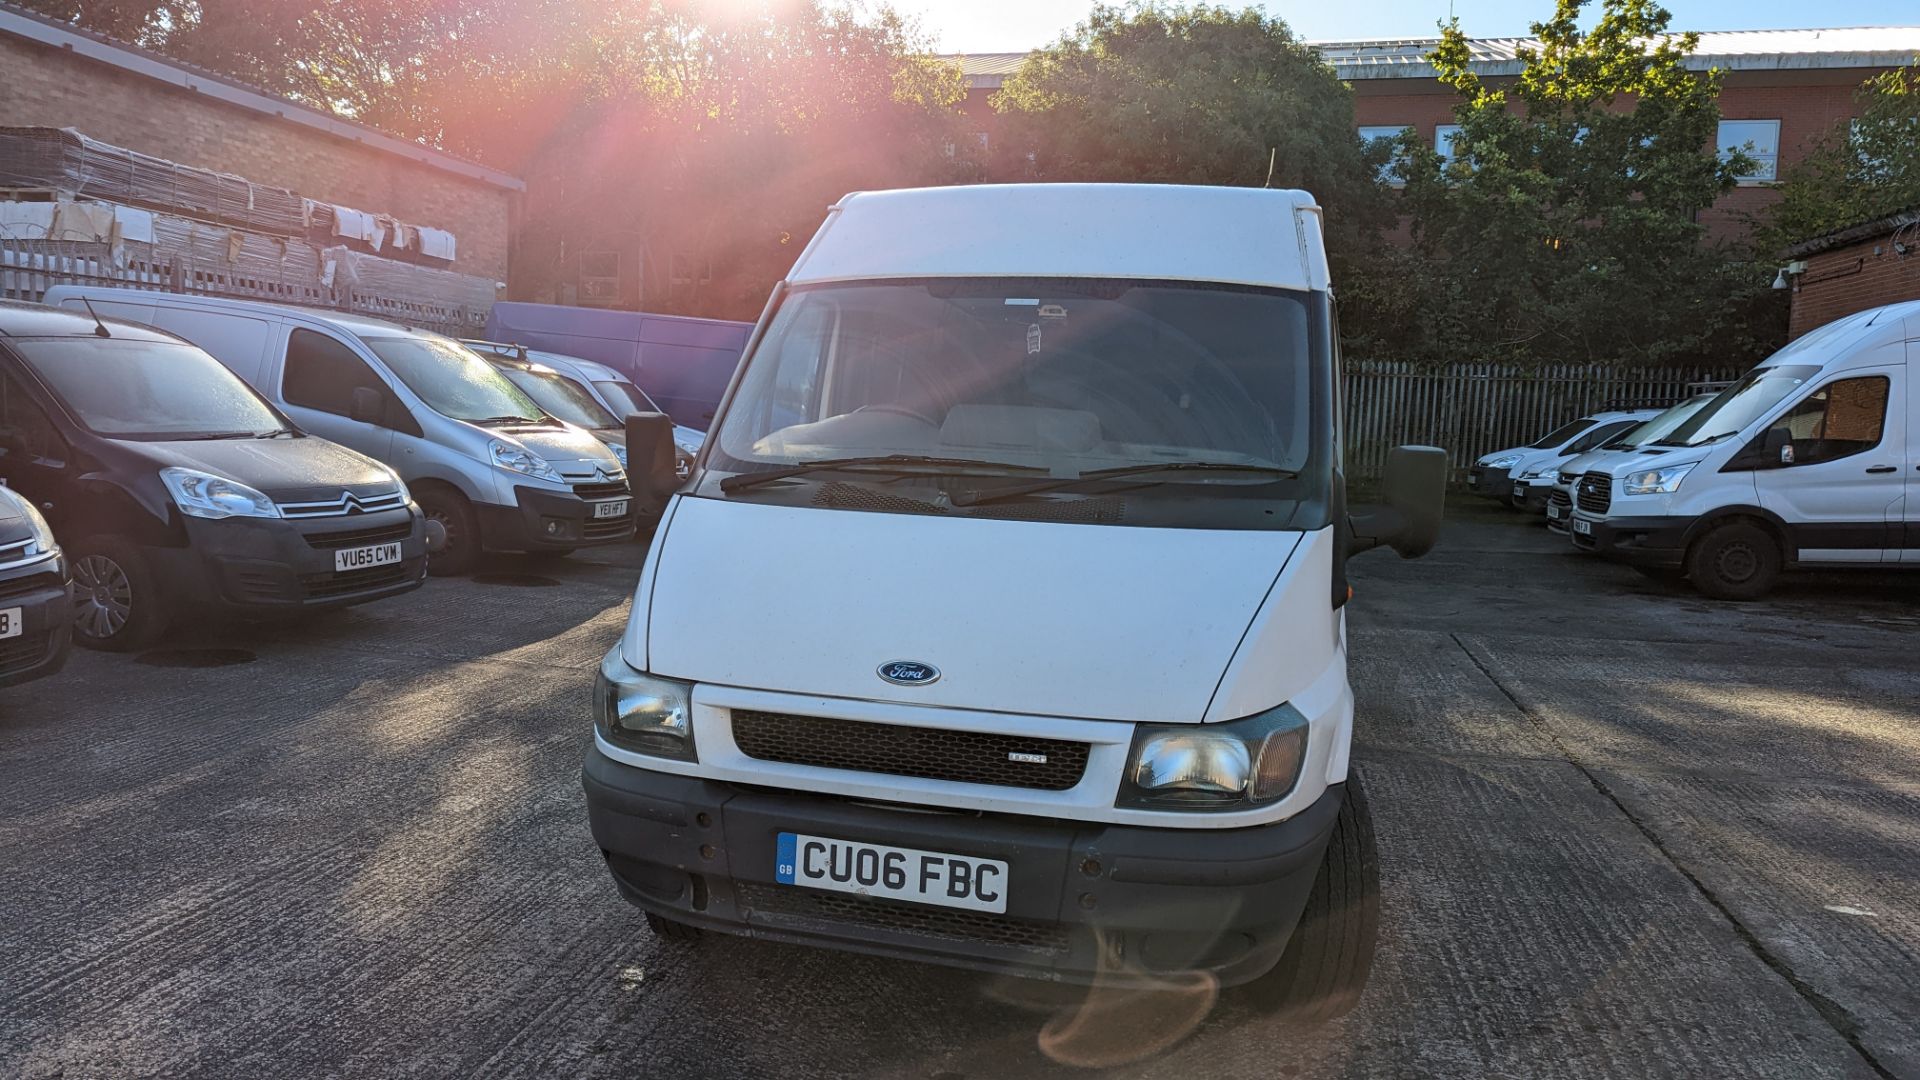 CU06 FBC Ford Transit panel van, 6 speed manual gearbox, 2402cc diesel engine. Colour: white. Fir - Image 41 of 44